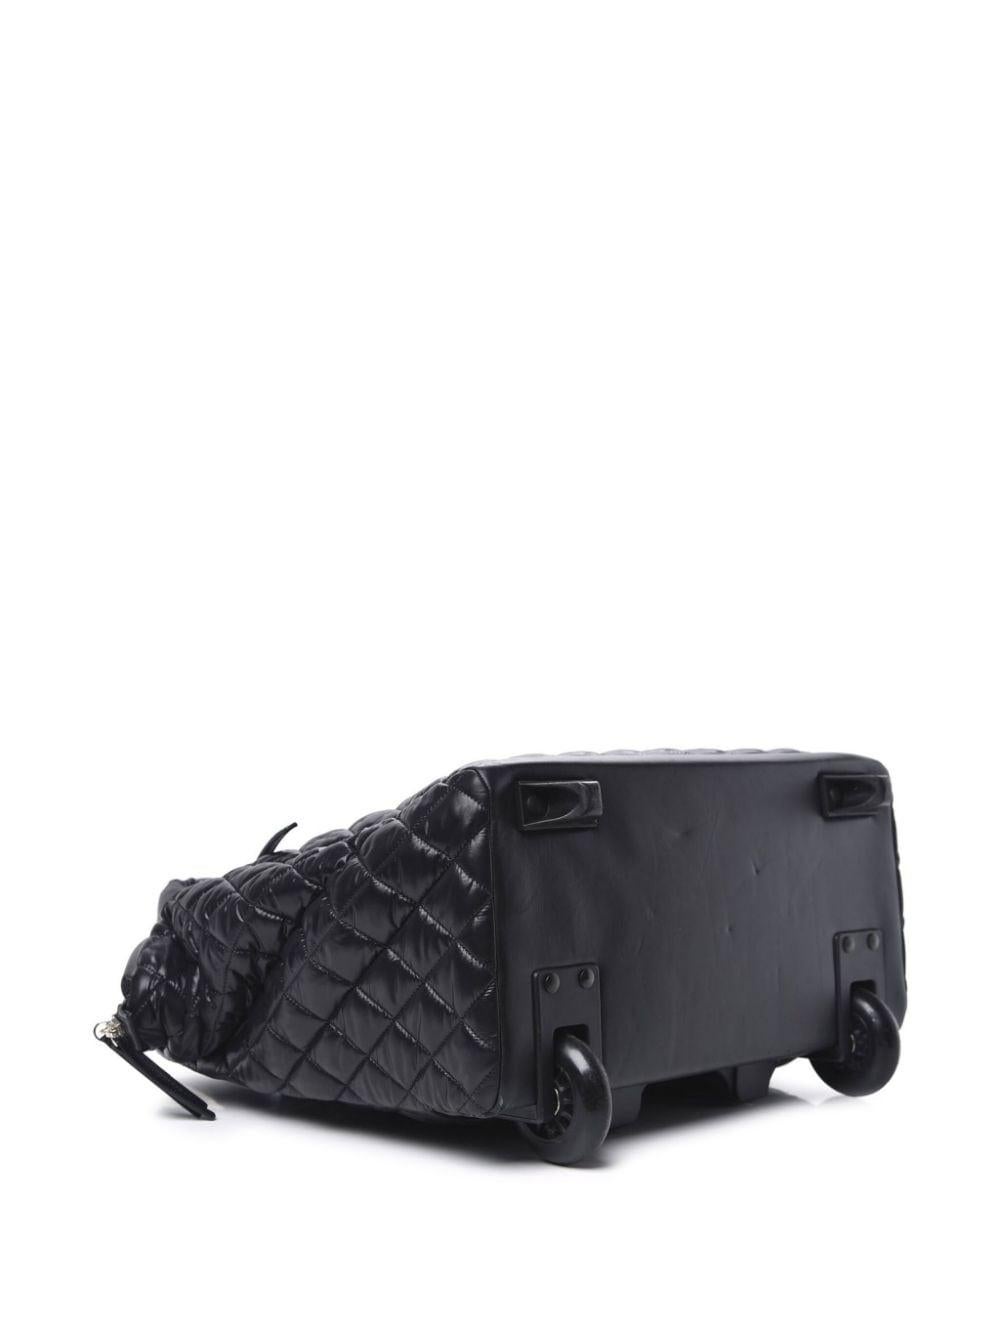 Chanel 2012 Coco Cocoon Quilted Case Carry On Trolley Travel Black Luggage Bag For Sale 7